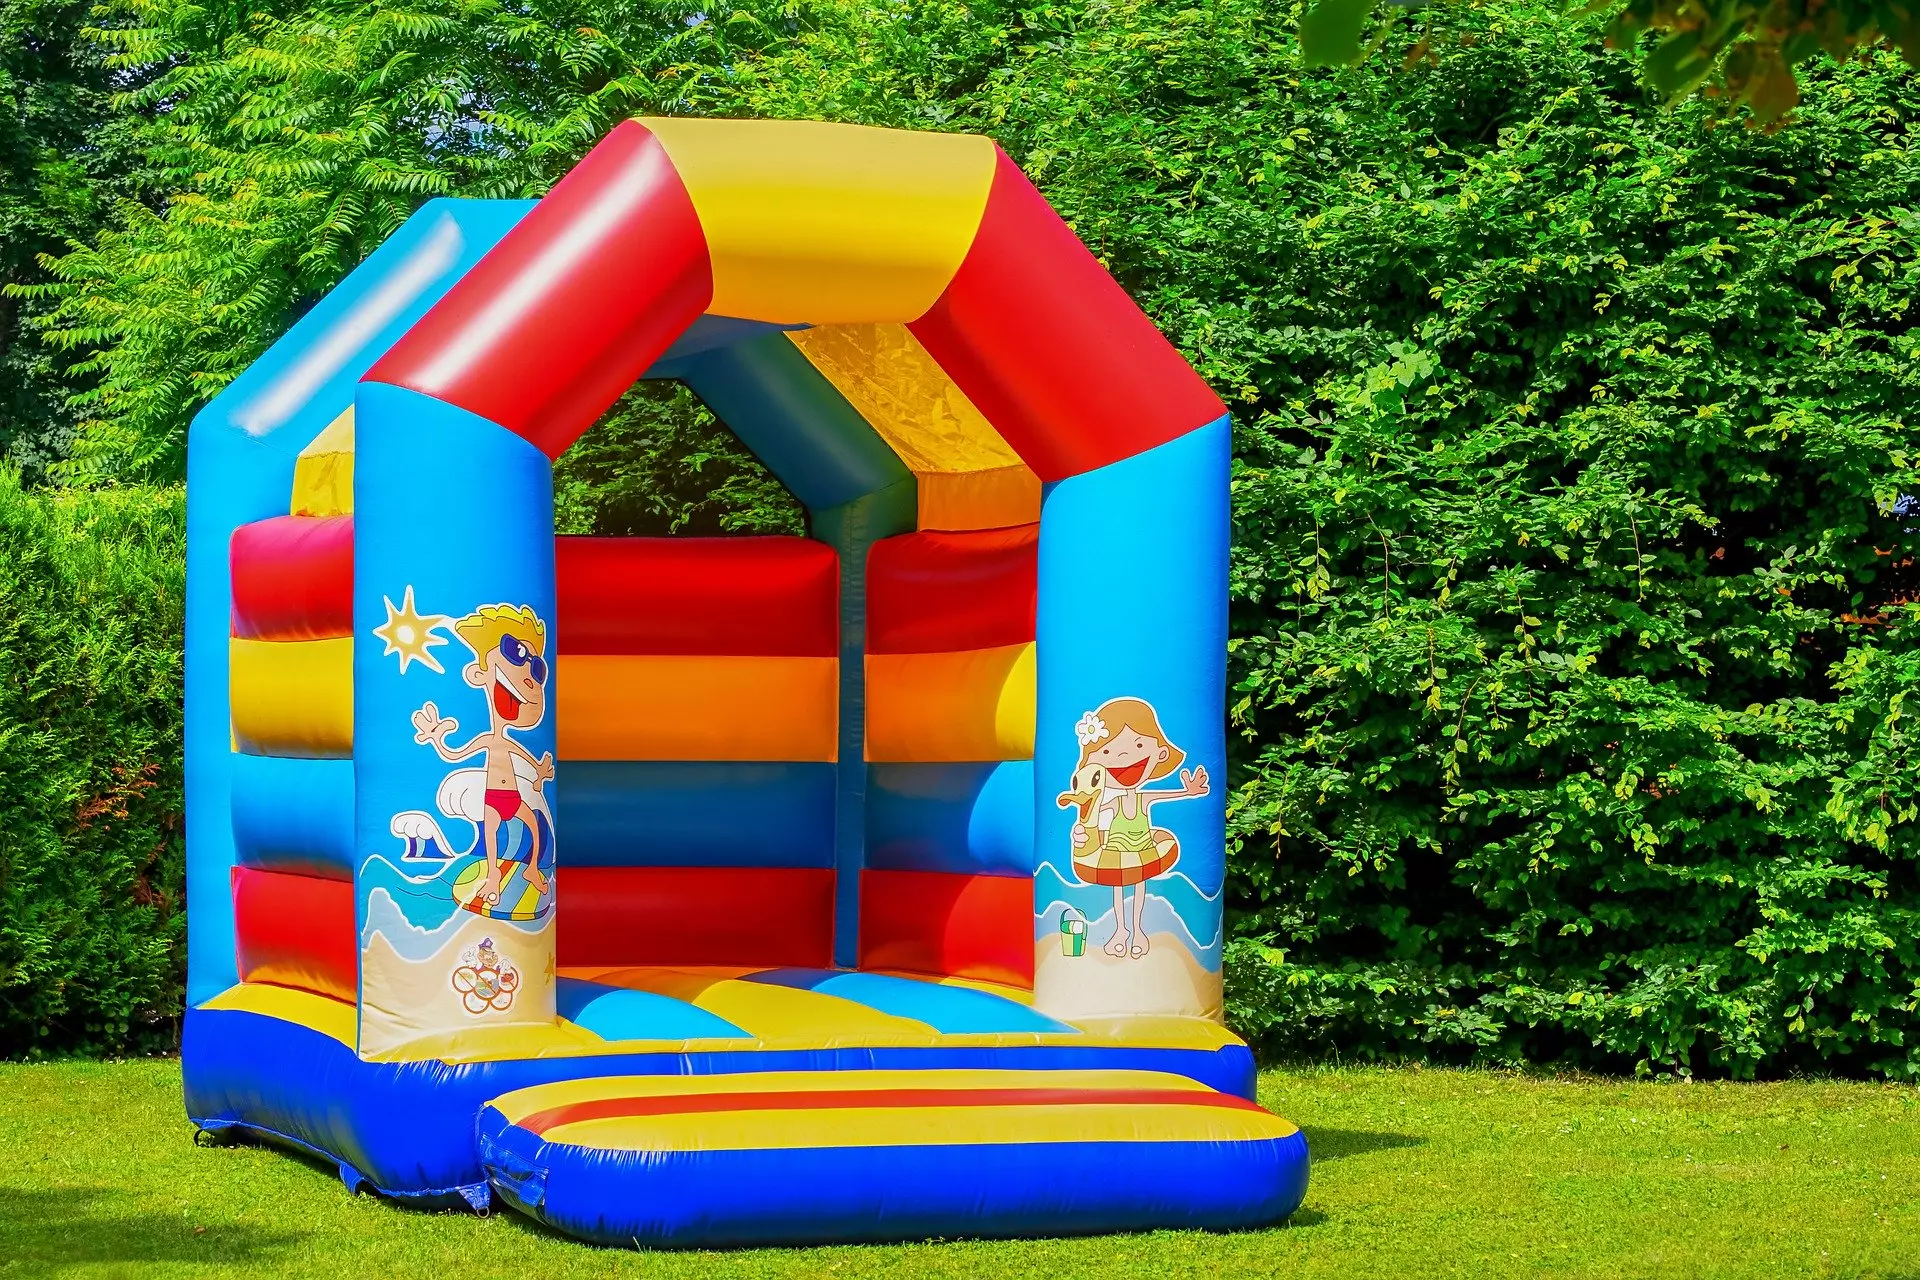 Who wouldn't want a bouncy castle in their back garden? (